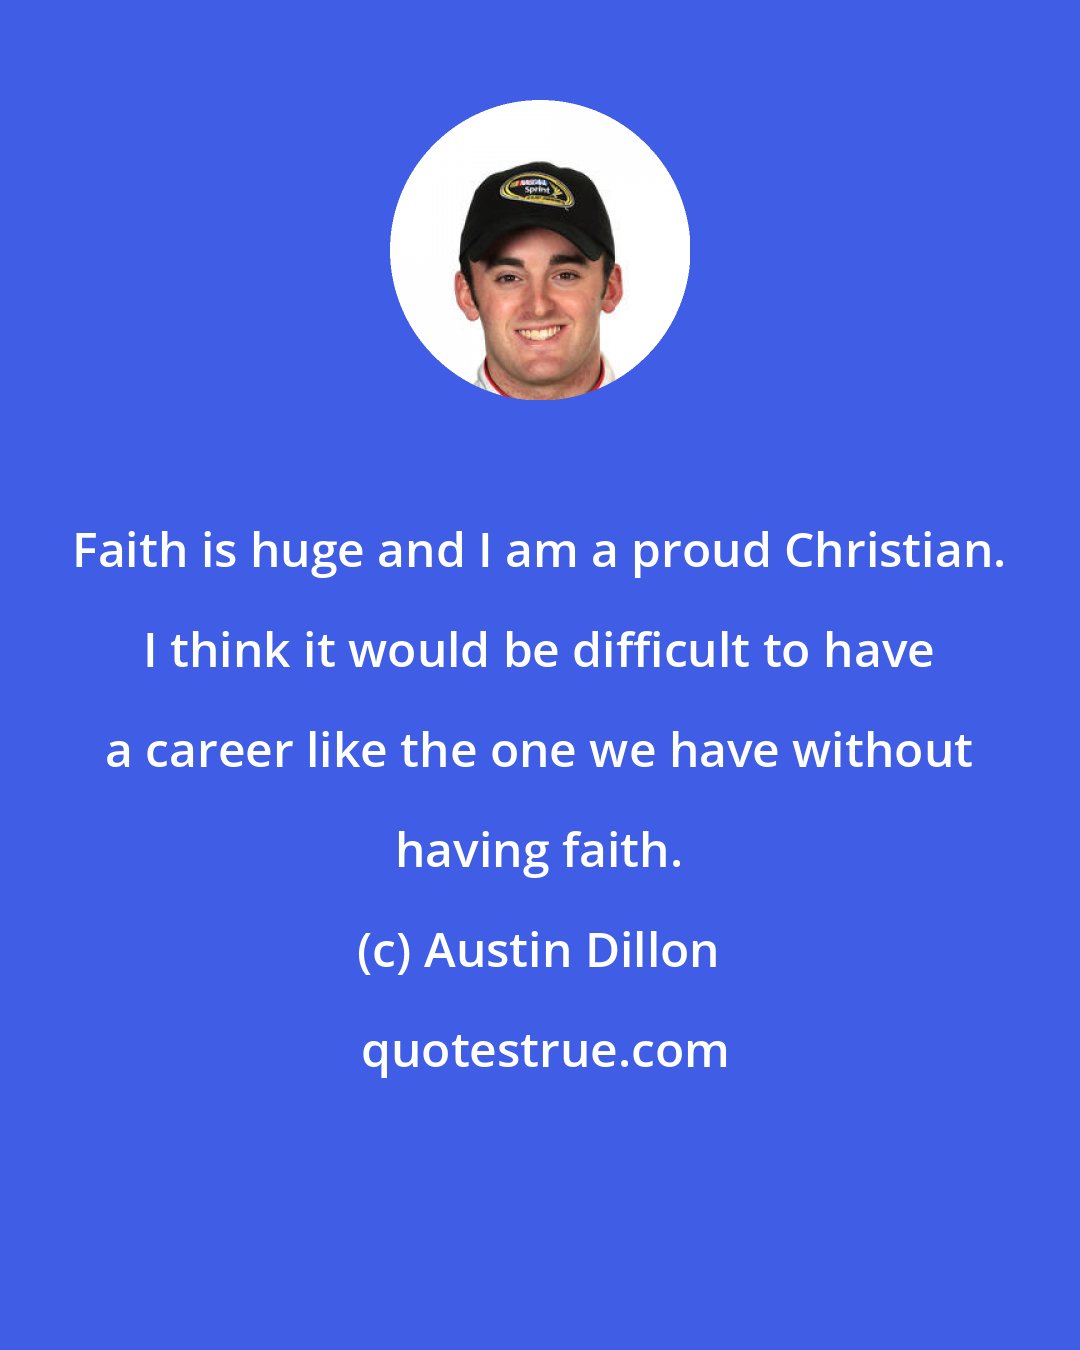 Austin Dillon: Faith is huge and I am a proud Christian. I think it would be difficult to have a career like the one we have without having faith.